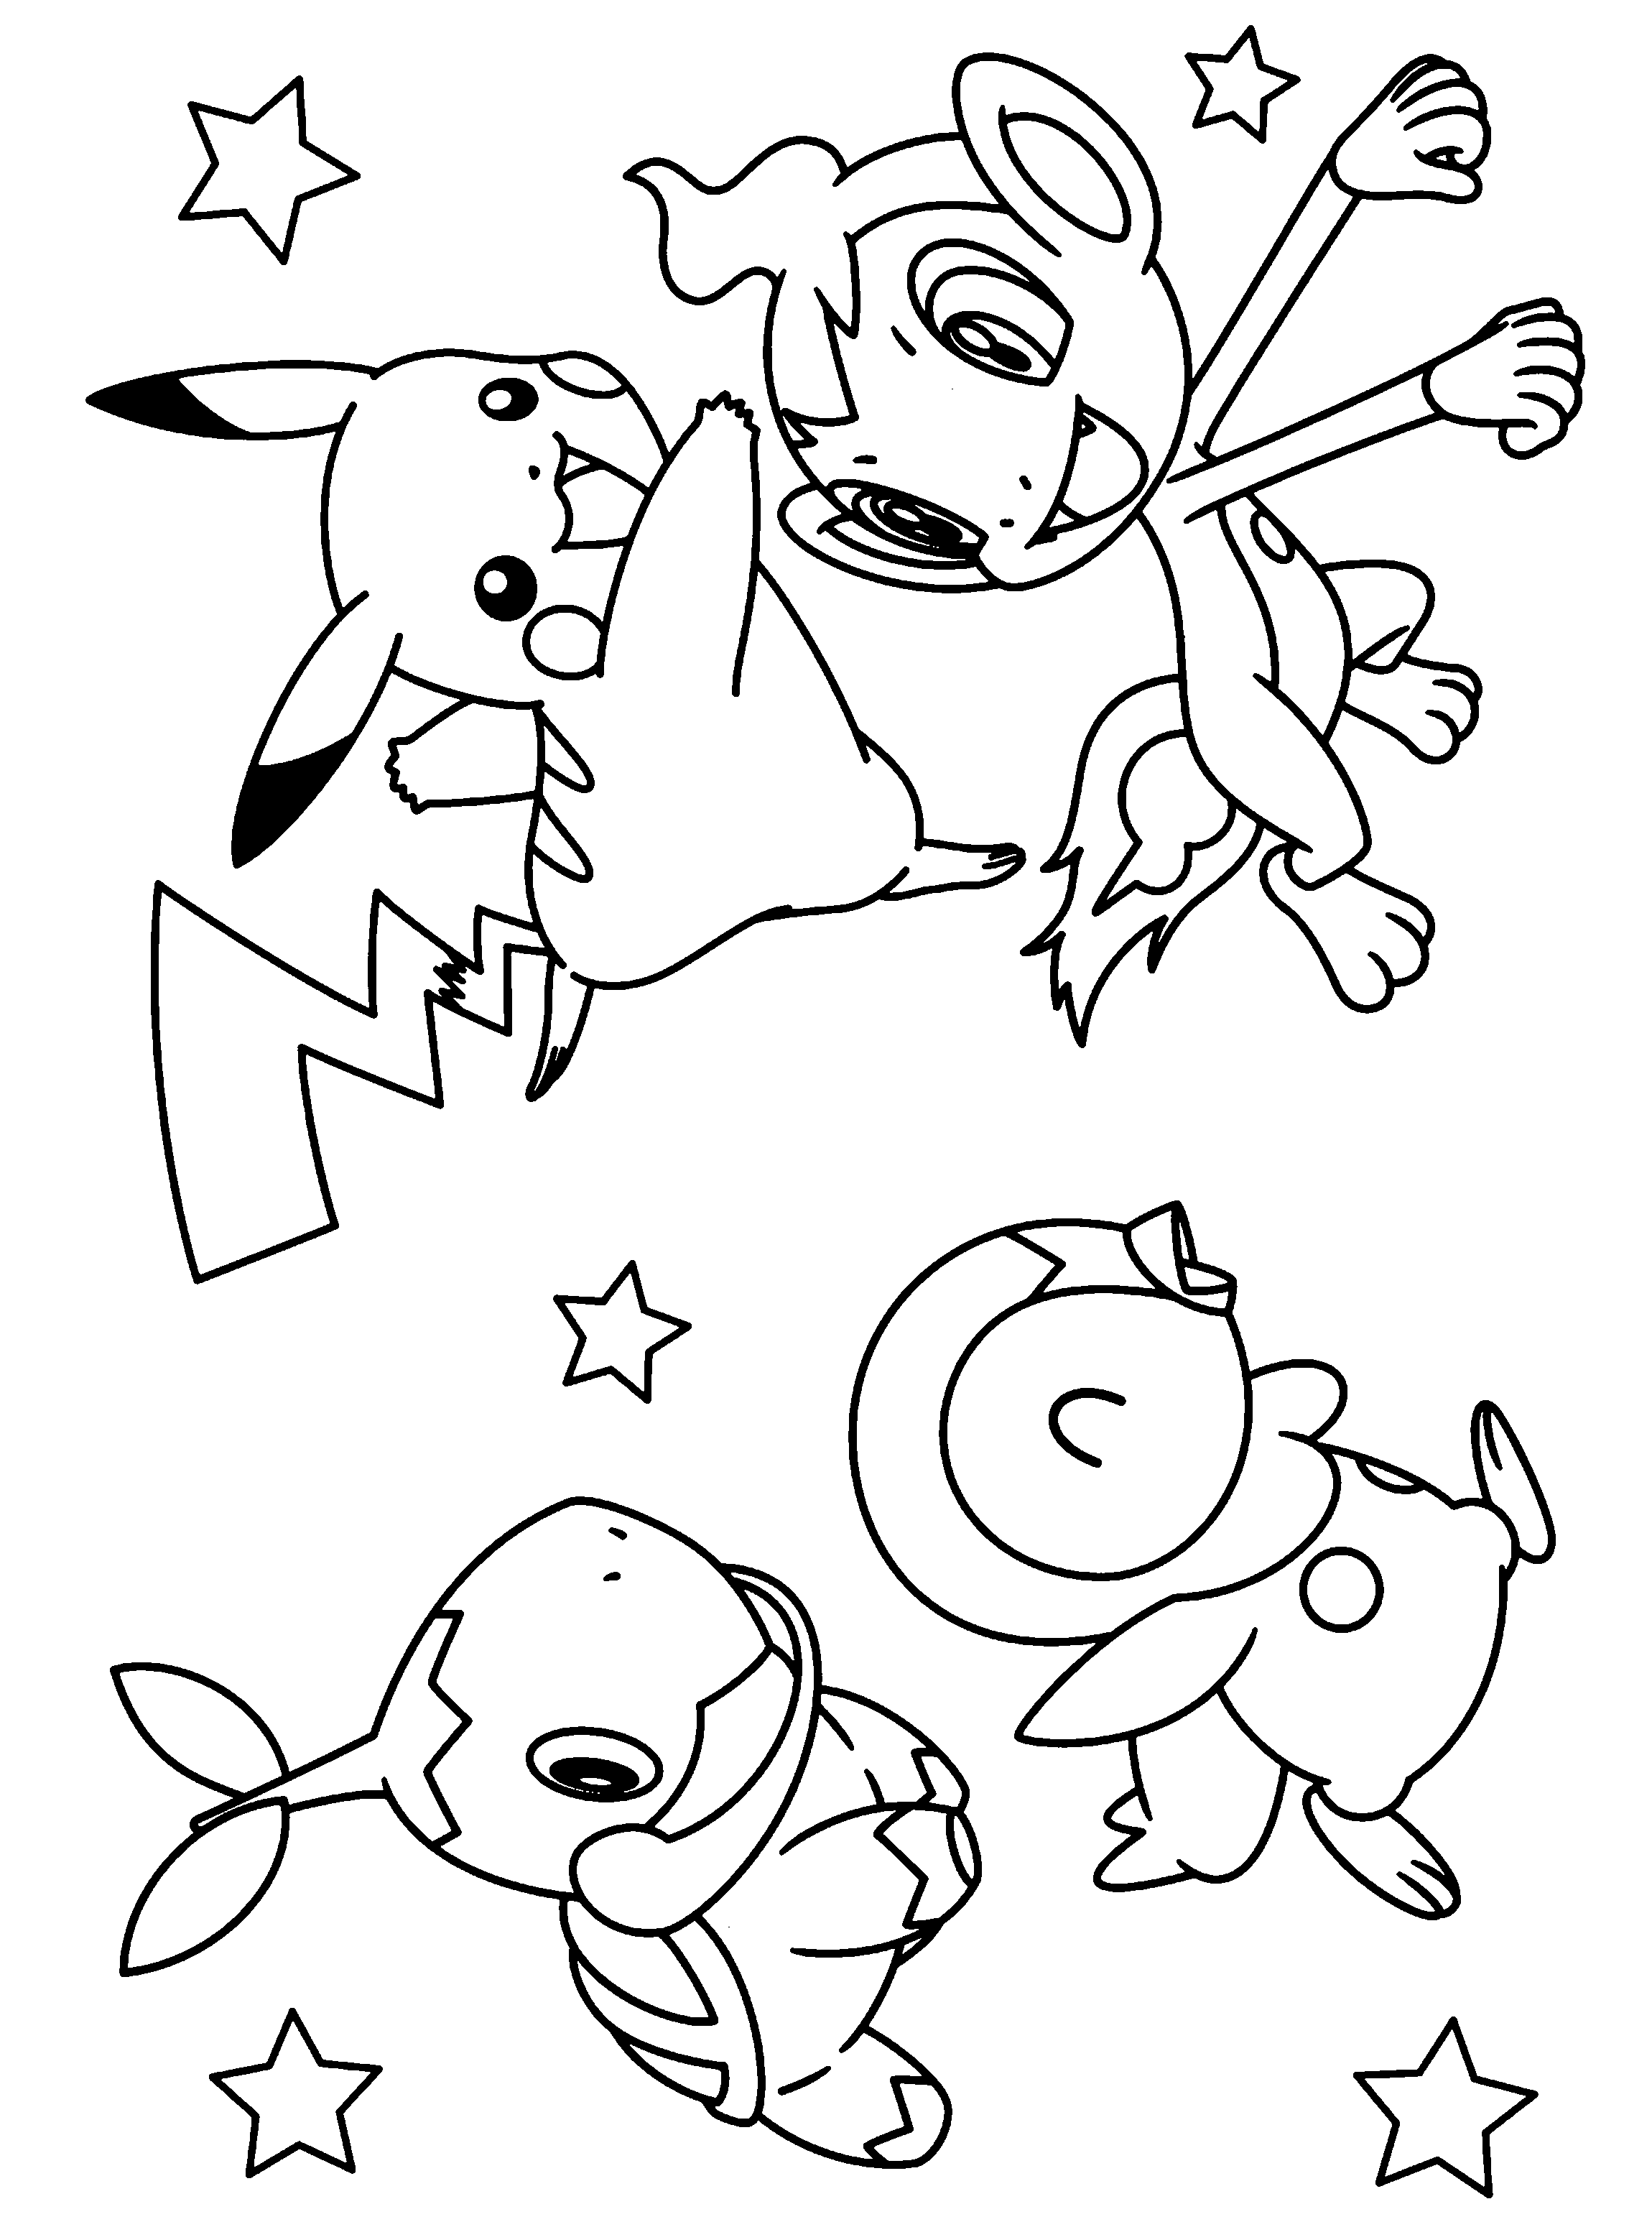 pokemon coloring sheets printable pokemon coloring pages download pokemon images and print pokemon coloring printable sheets 